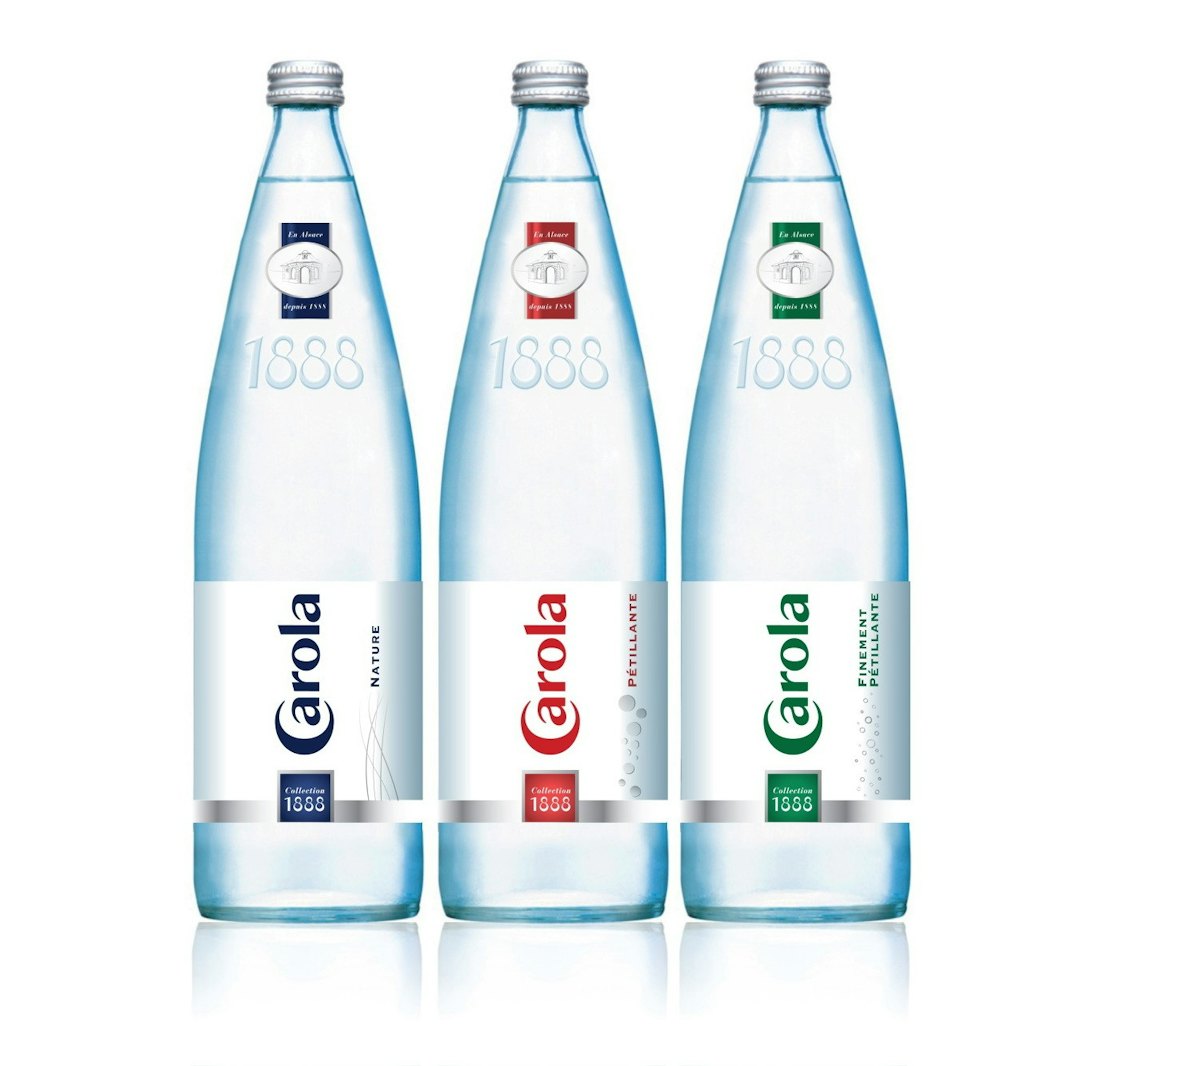 Summit introduces still and sparkling water in recyclable glass